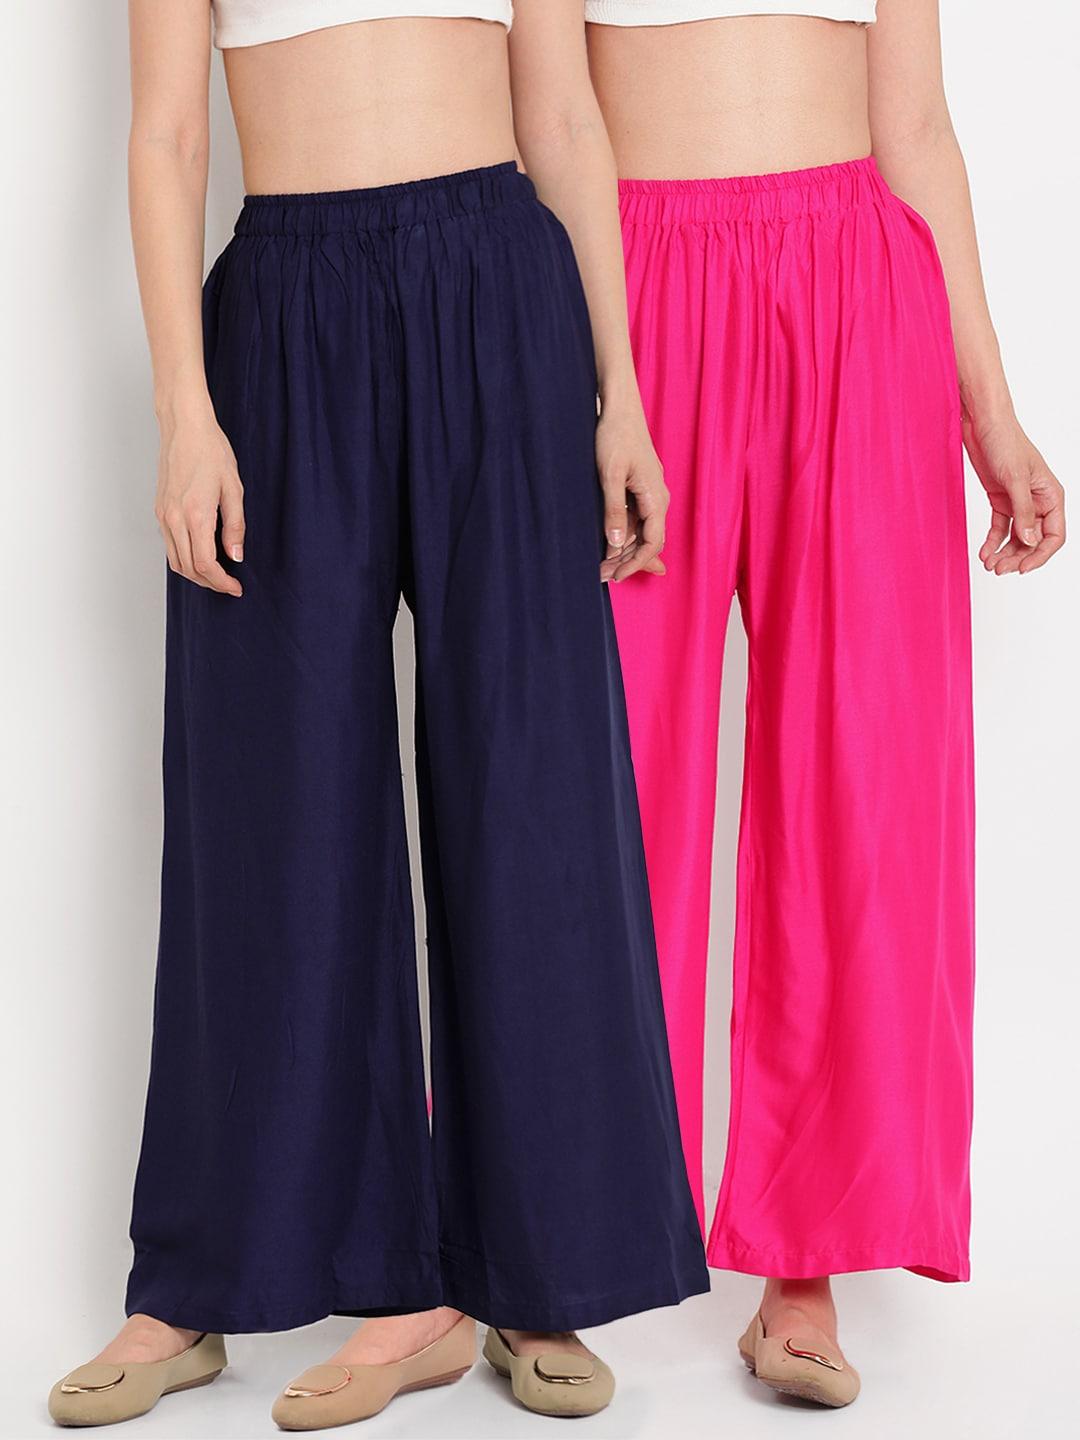 tag 7 women set of 2 pink & navy blue solid flared palazzos